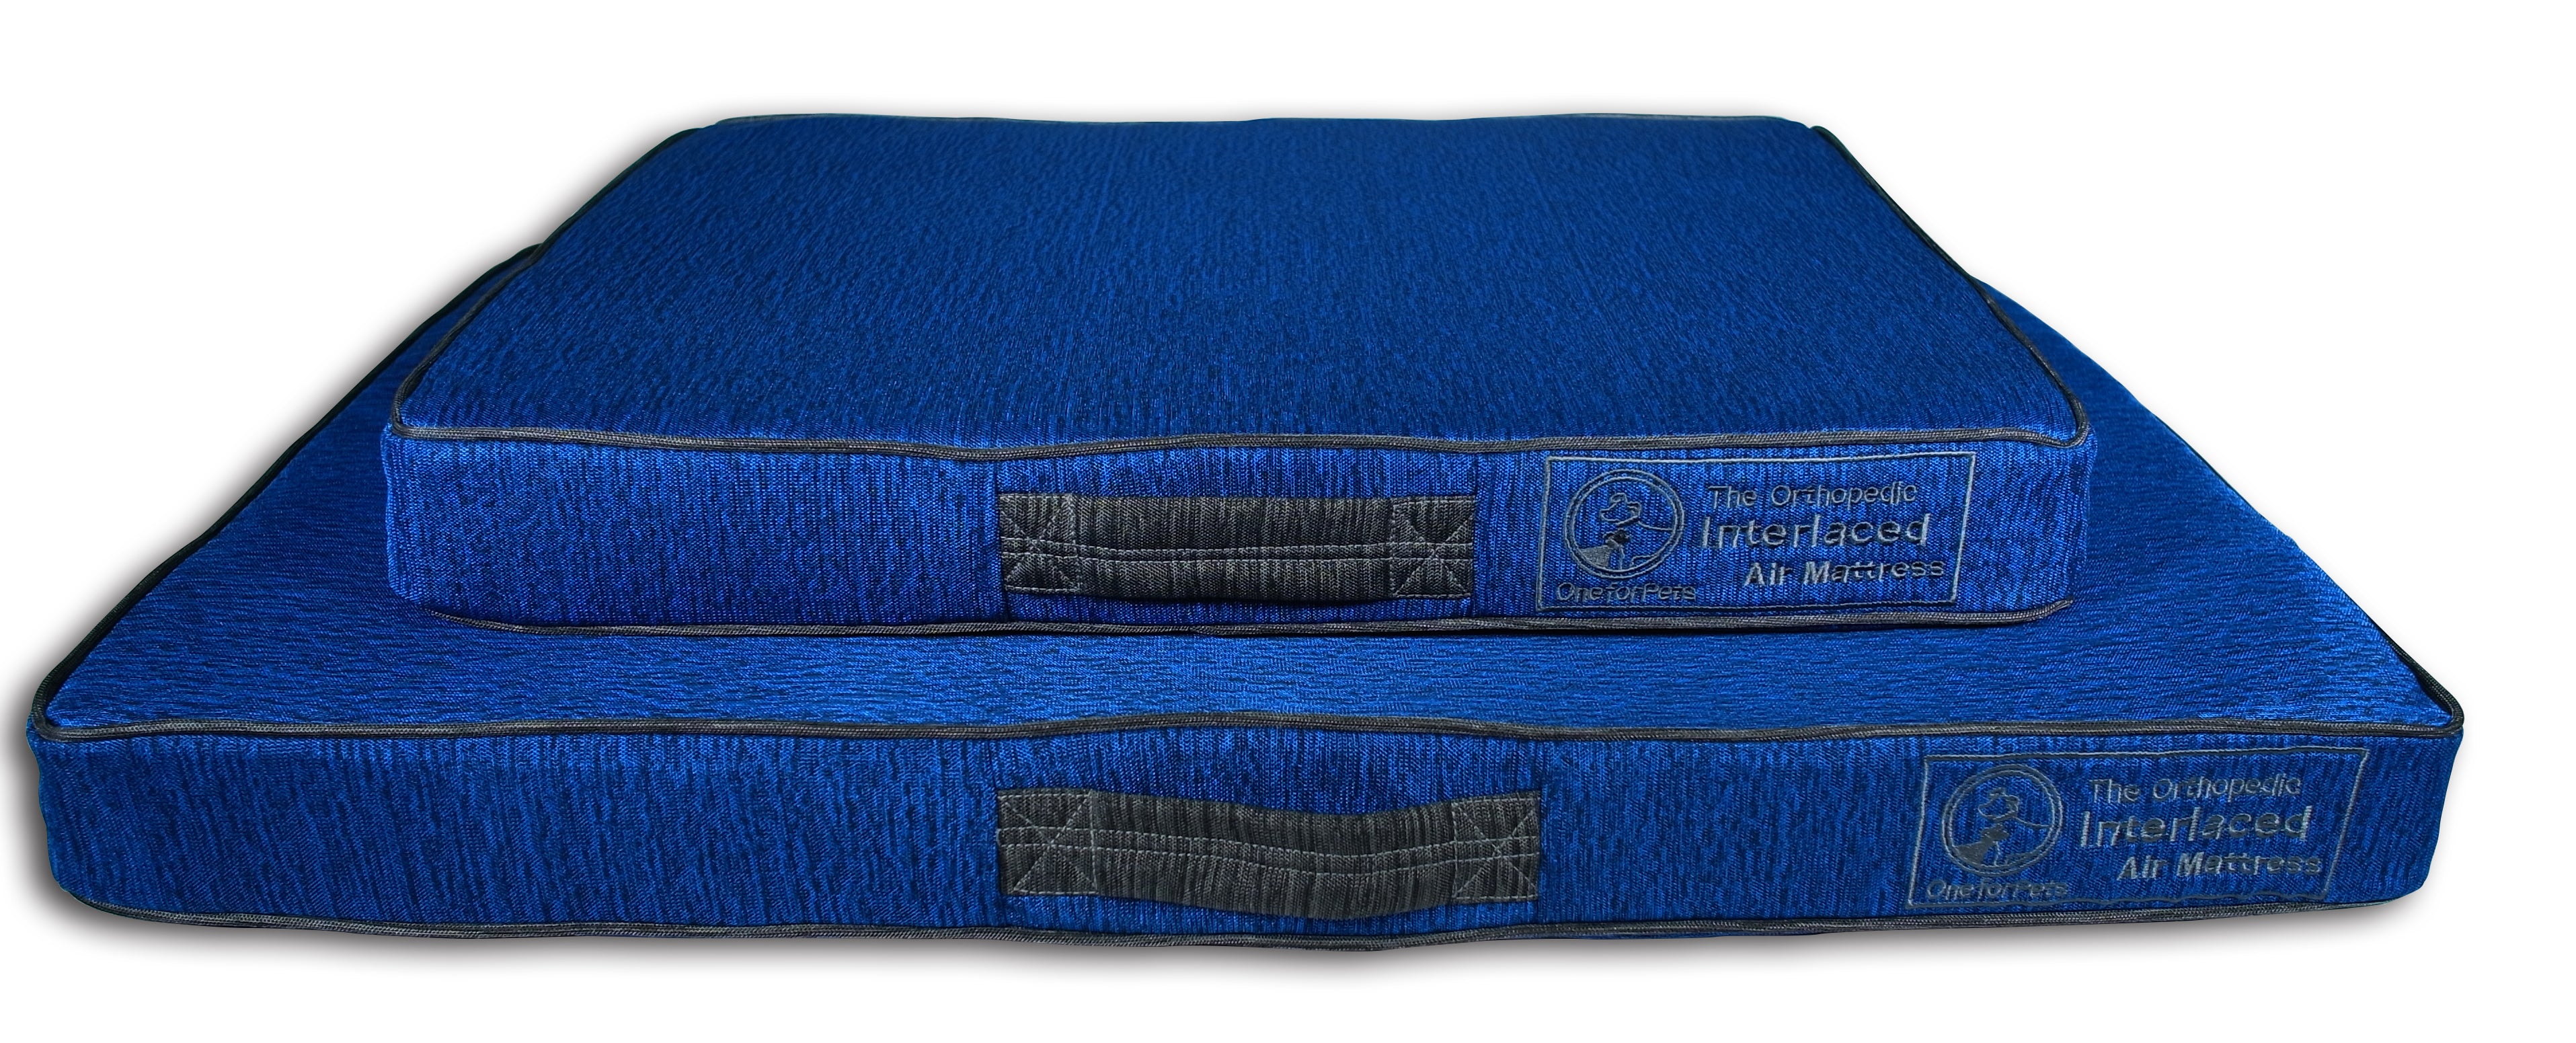 Orthopedic Interlaced Air Bed with "Fine Line" Collection